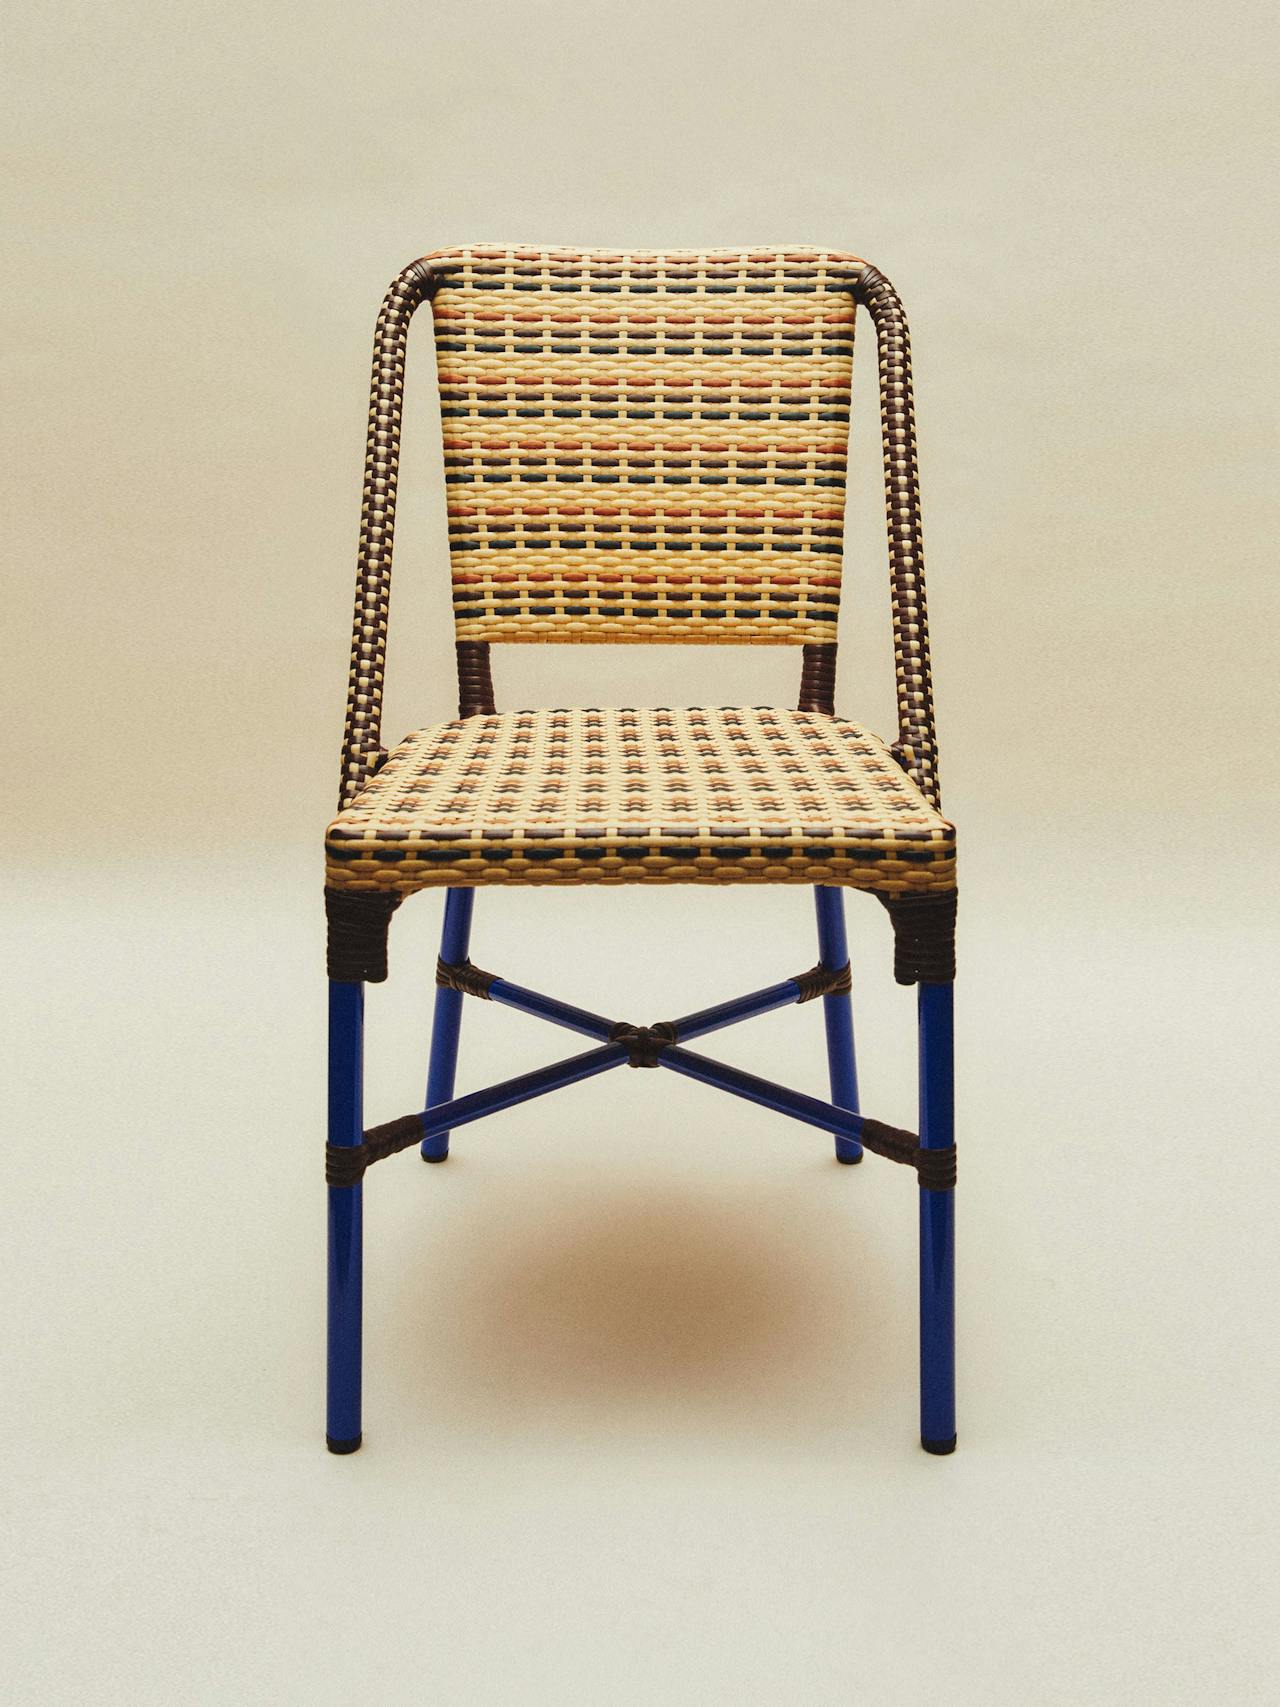 Woven chair with metal structure